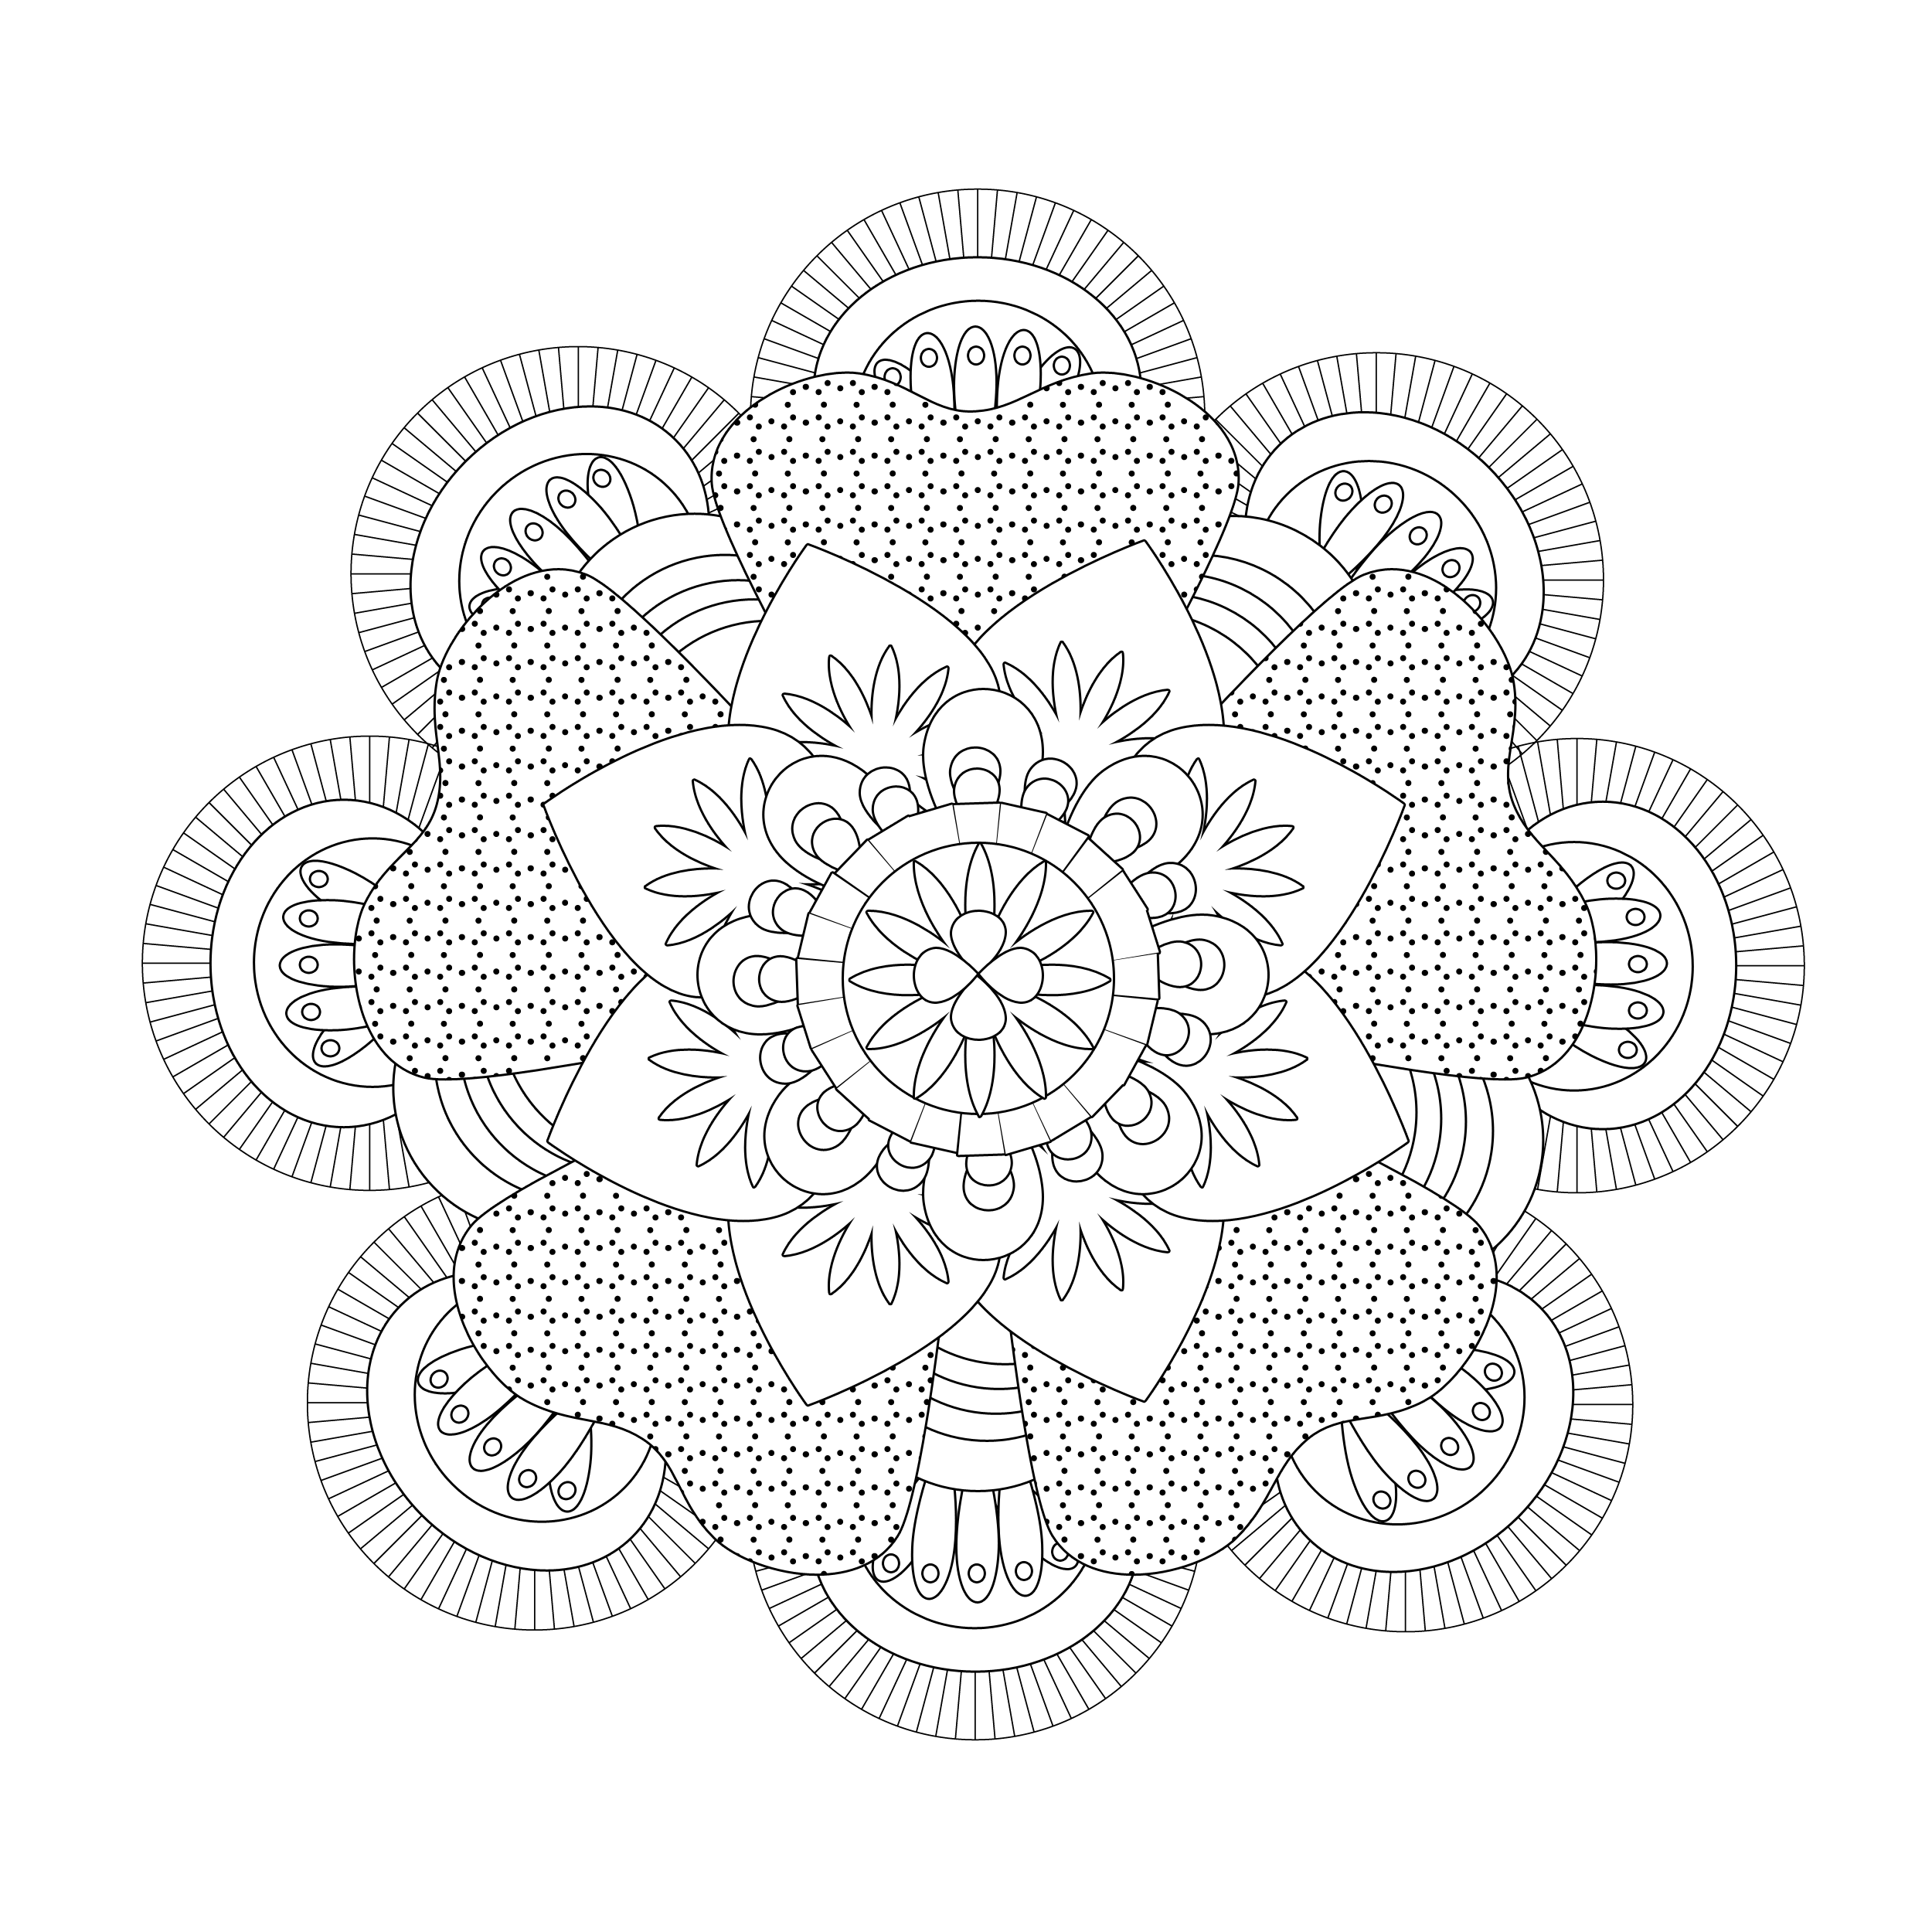 Free Printable Mandala Coloring Pages For Adults Best Coloring Pages